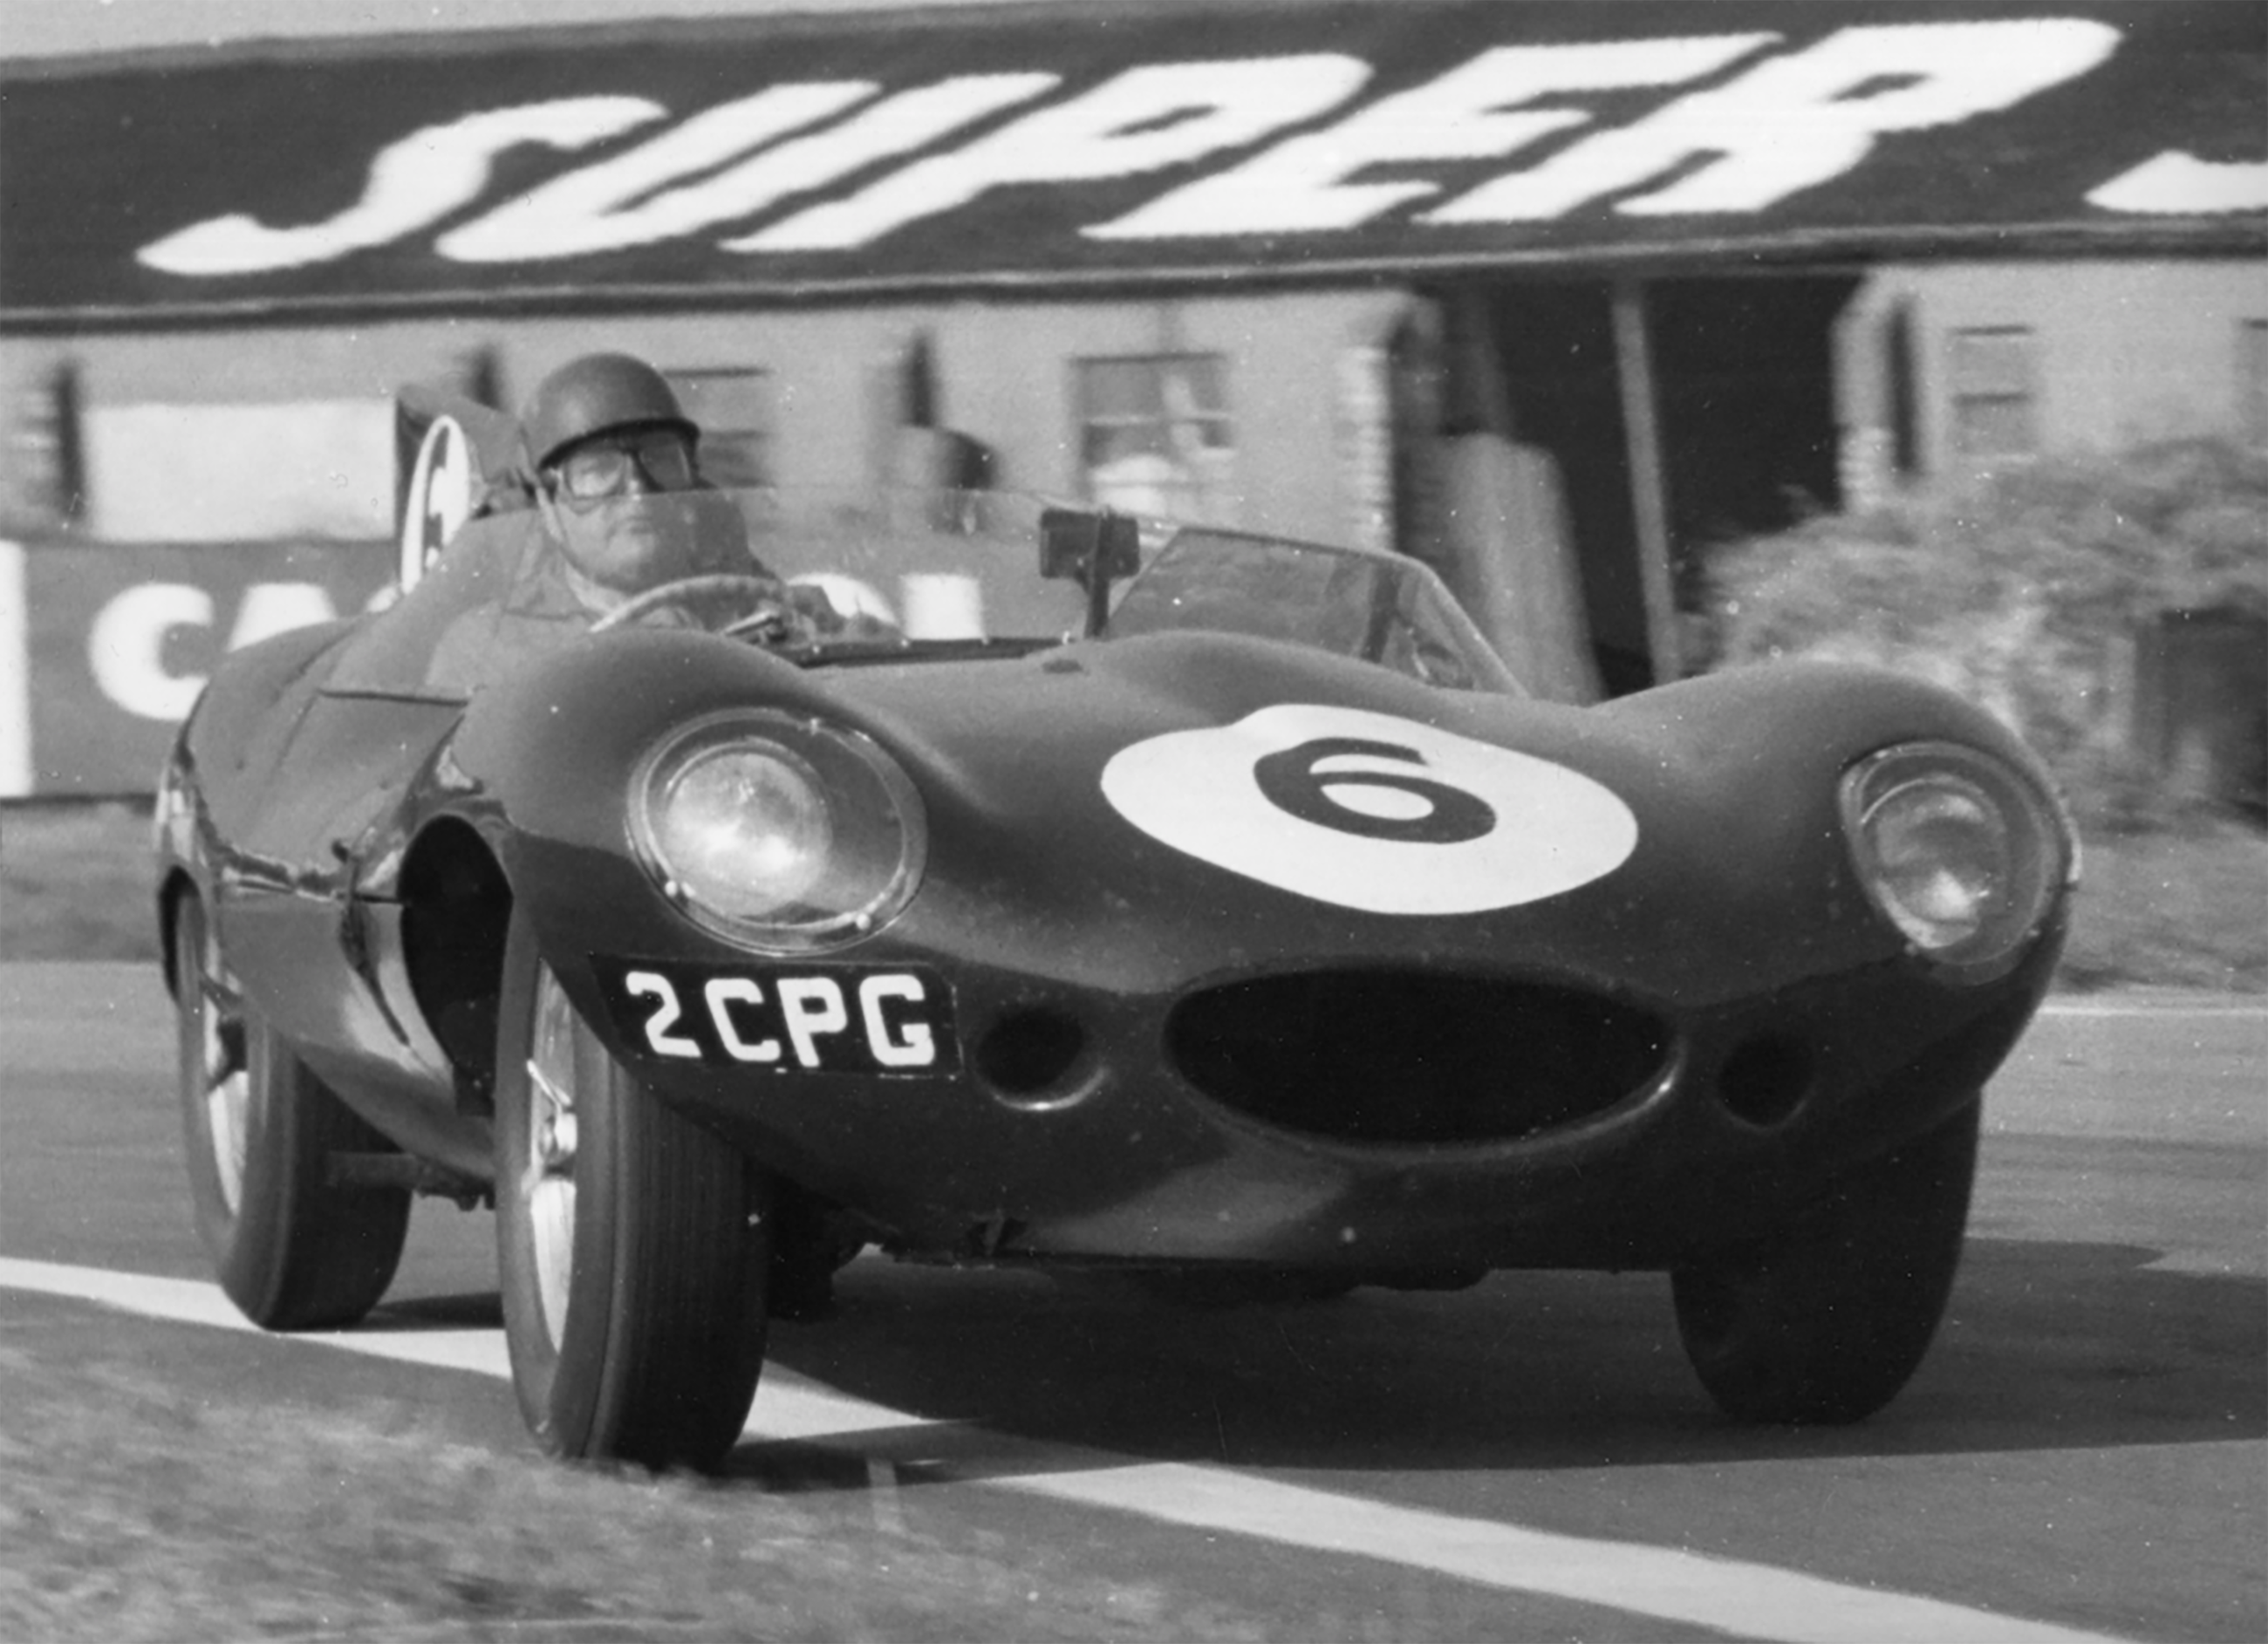 Another advocate of sideways driving - the rumbustious Duncan Hamilton in his ex-works ‘Longnose’ D-Type Jaguar - the type of car for which Dunlop Racing tyres had been tailored through the mid-1950s.